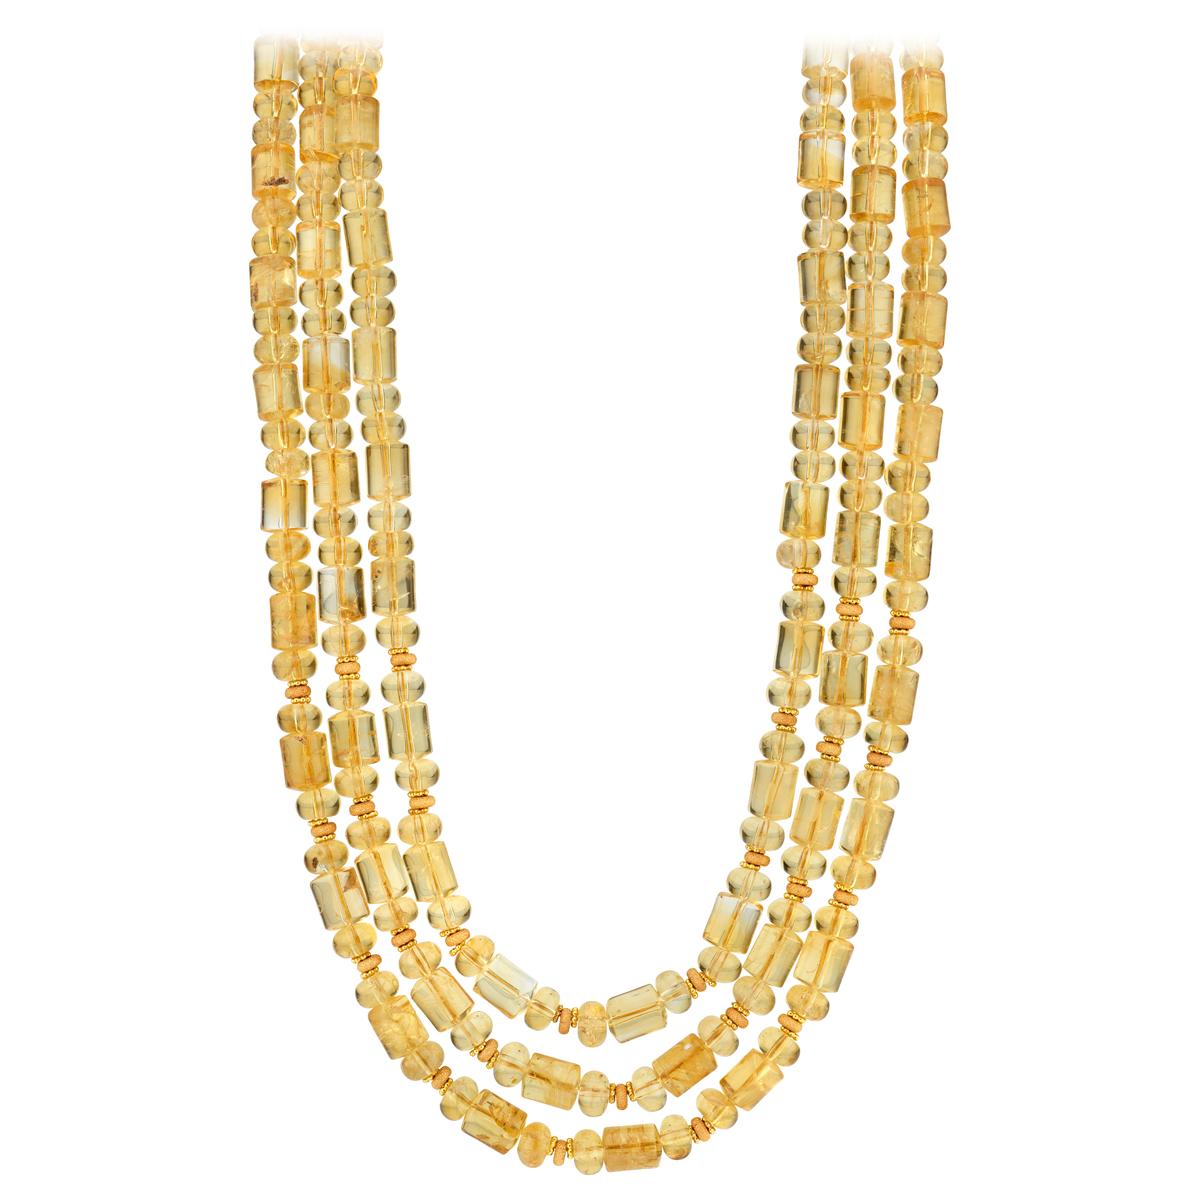 3-Strand Citrine Rondelle and Barrel Shaped Bead Necklace w/ 14k and 18k Gold 